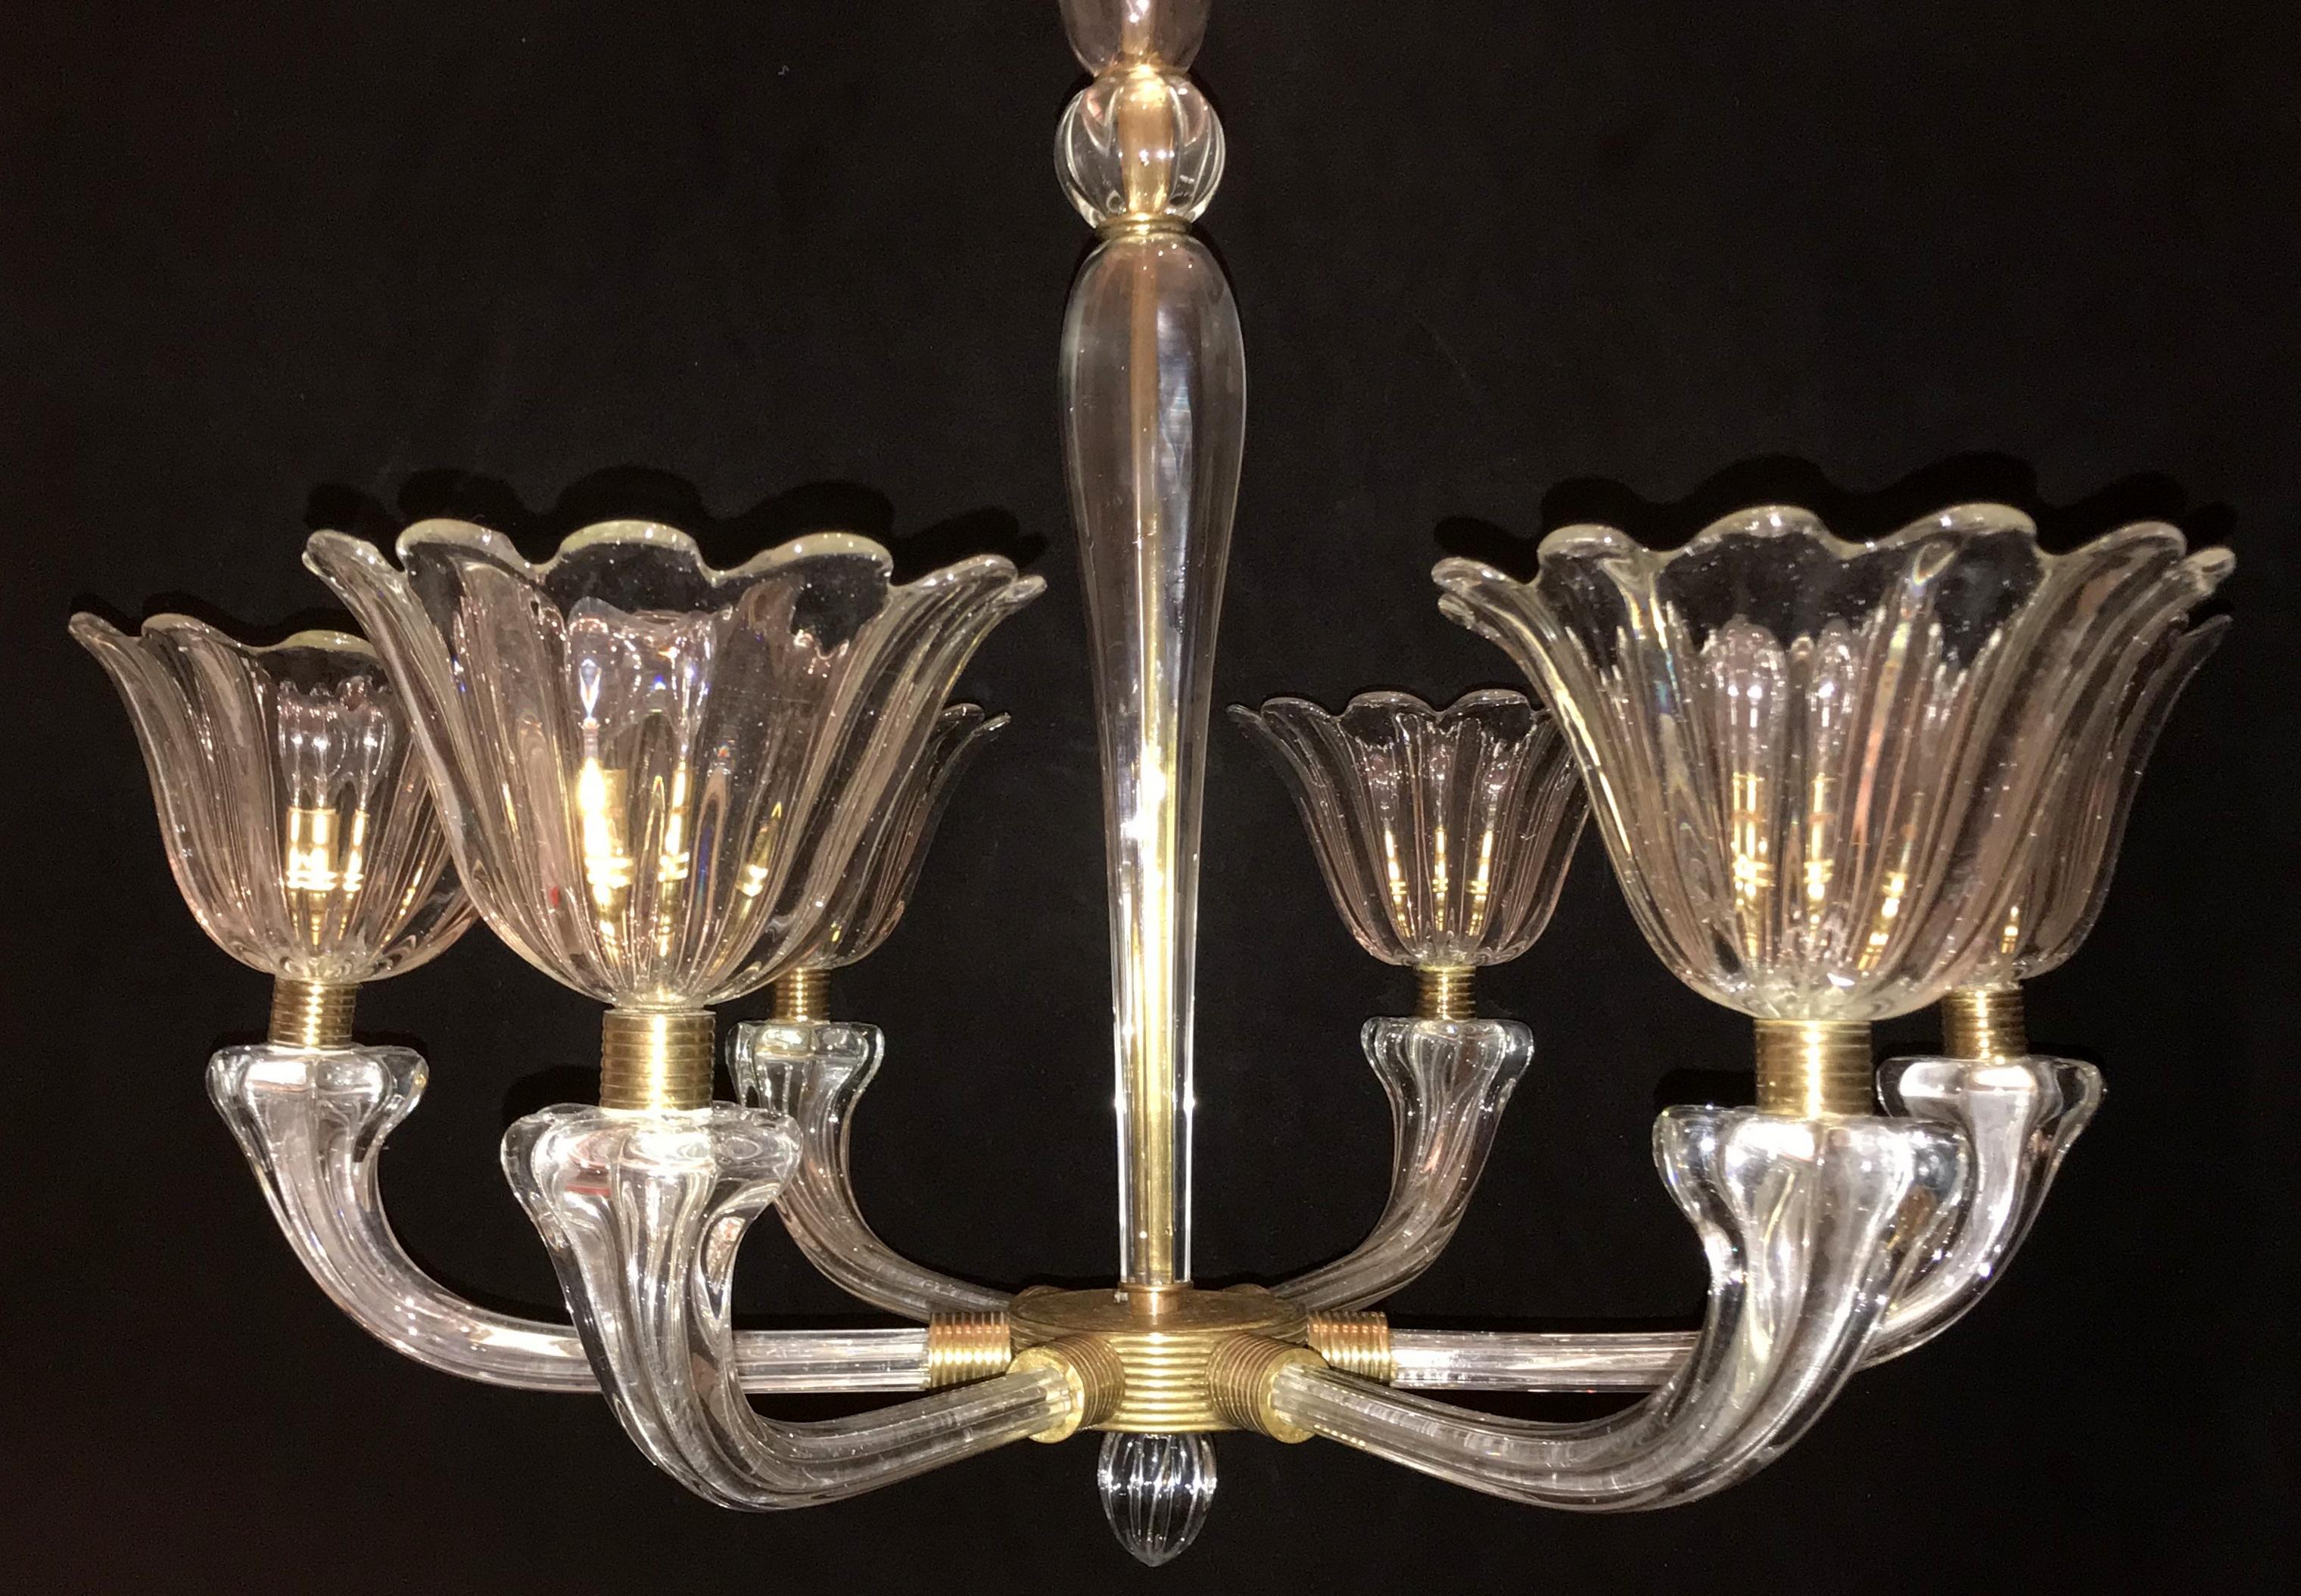 A wonderful Mid-Century Modern Venetian Art Deco style, bronze and blown clear scalloped glass six-light chandelier. Unfortunately the pictures do not do the chandelier justice... this is a very simple and elegant fixture.
Measures: Currently: 43